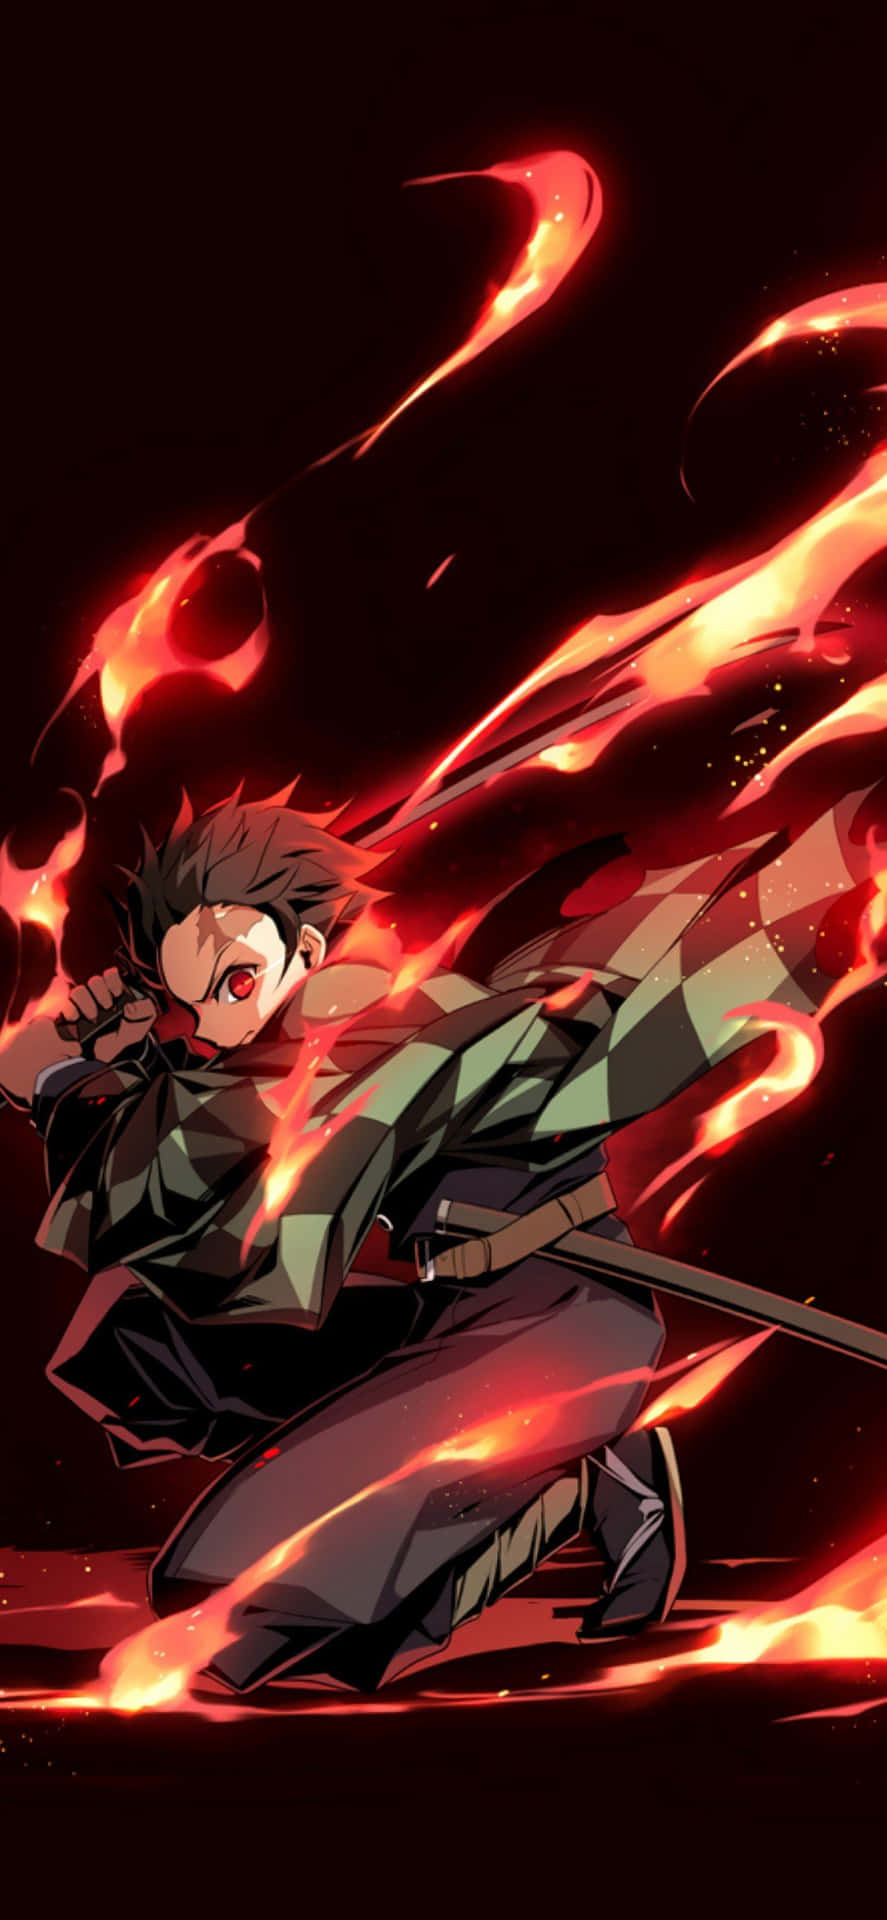 Enjoy a Demon Slayer adventure with your Iphone 11 Wallpaper